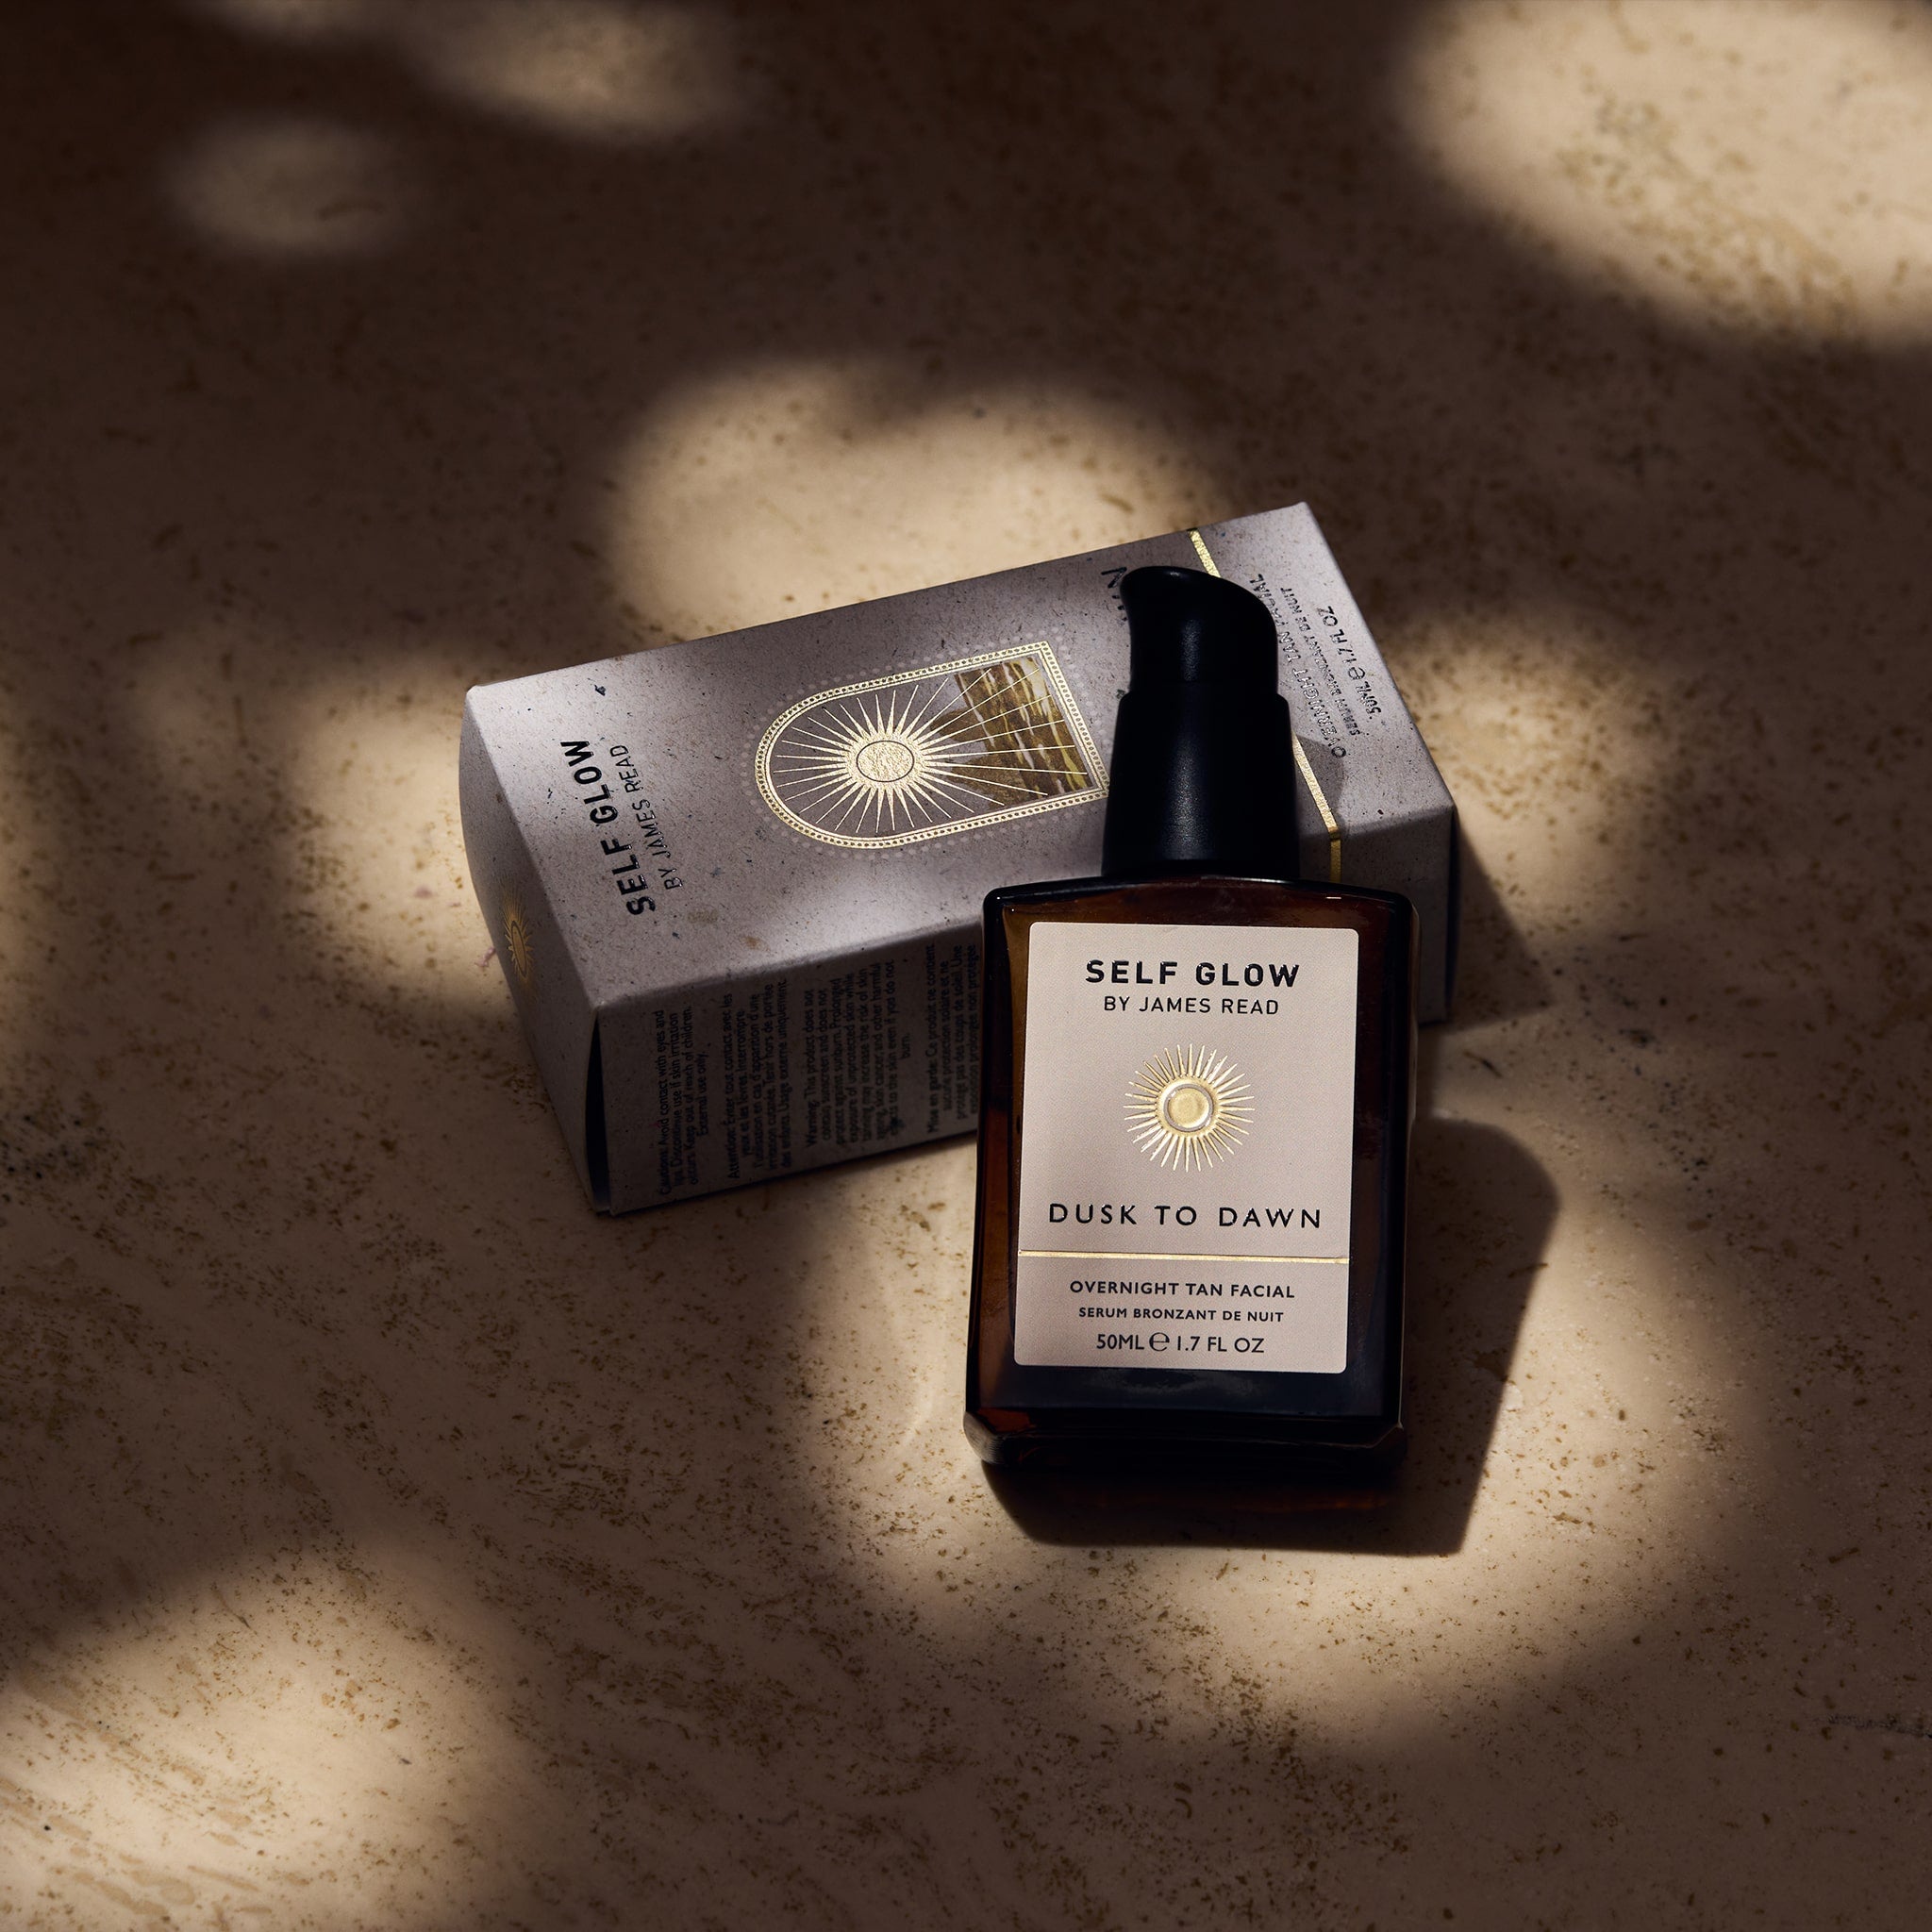 Self Glow by James Read Dusk to Dawn Overnight Tan Facial recyclable glass bottle leaning against a recycled cardboard box with vegetable-based inks and eco-friendly packaging, showcased under dappled light.